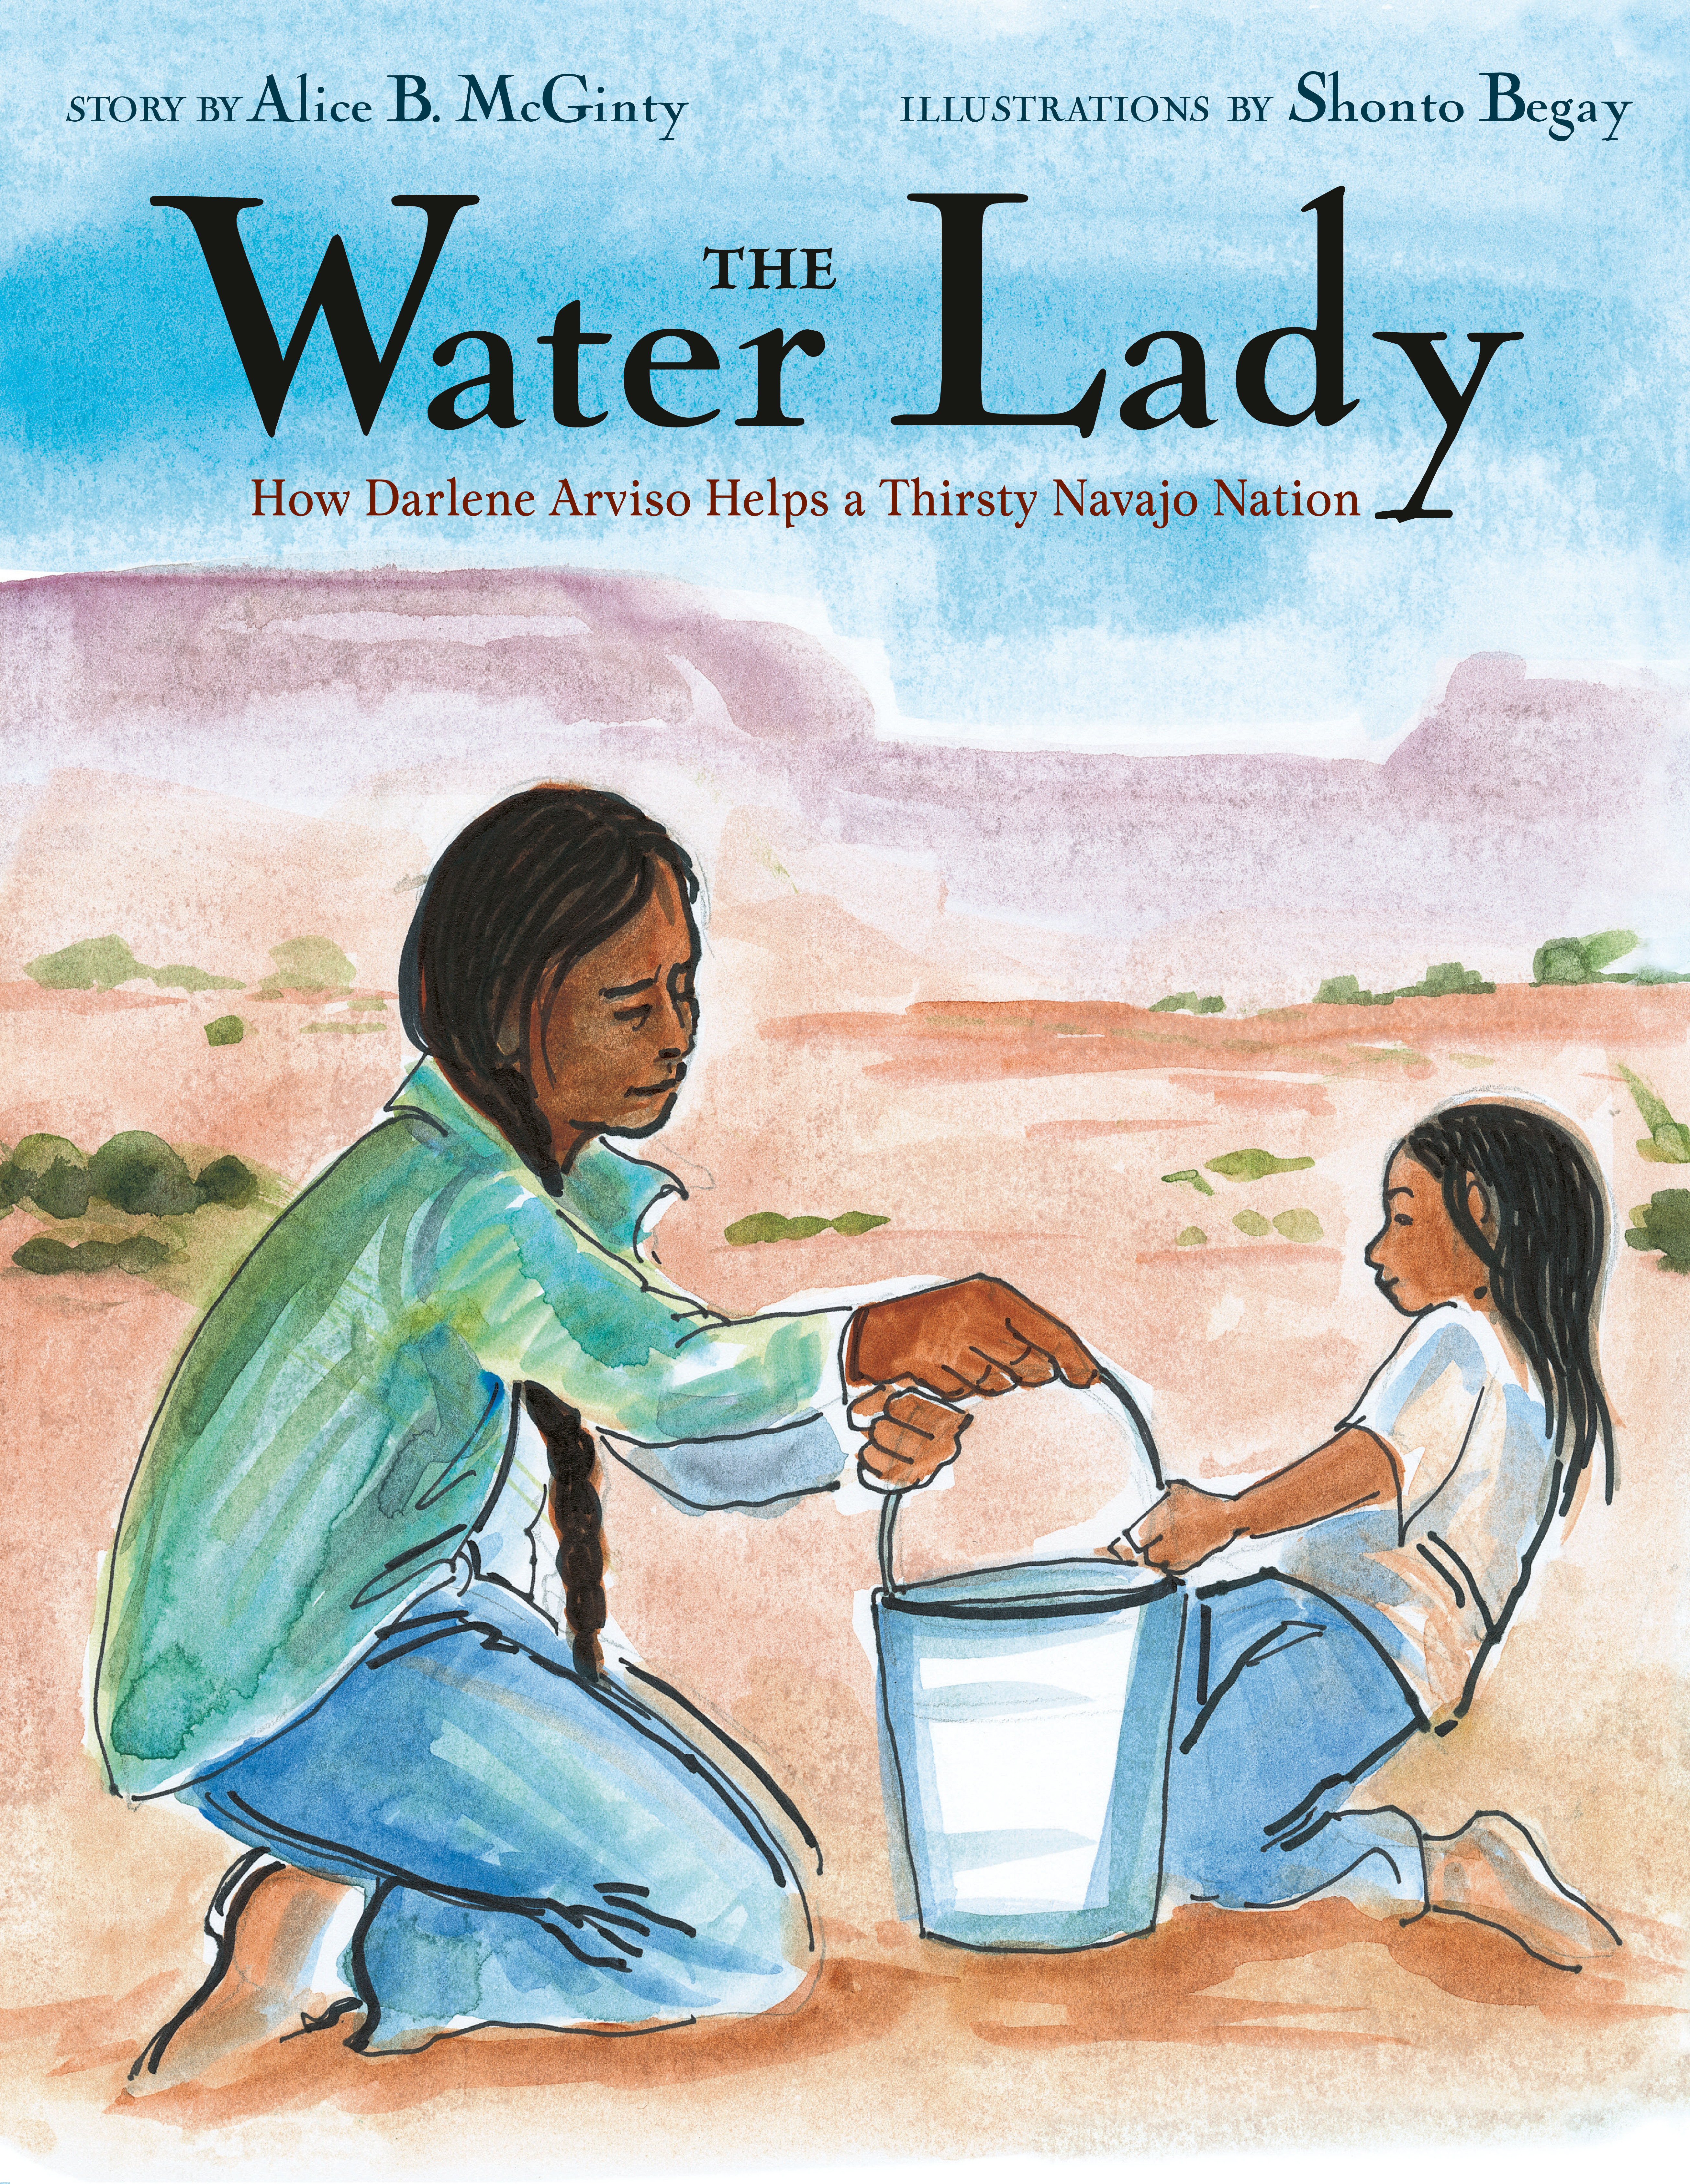 The Water Lady [electronic resource] : How Darlene Arviso Helps a Thirsty Navajo Nation